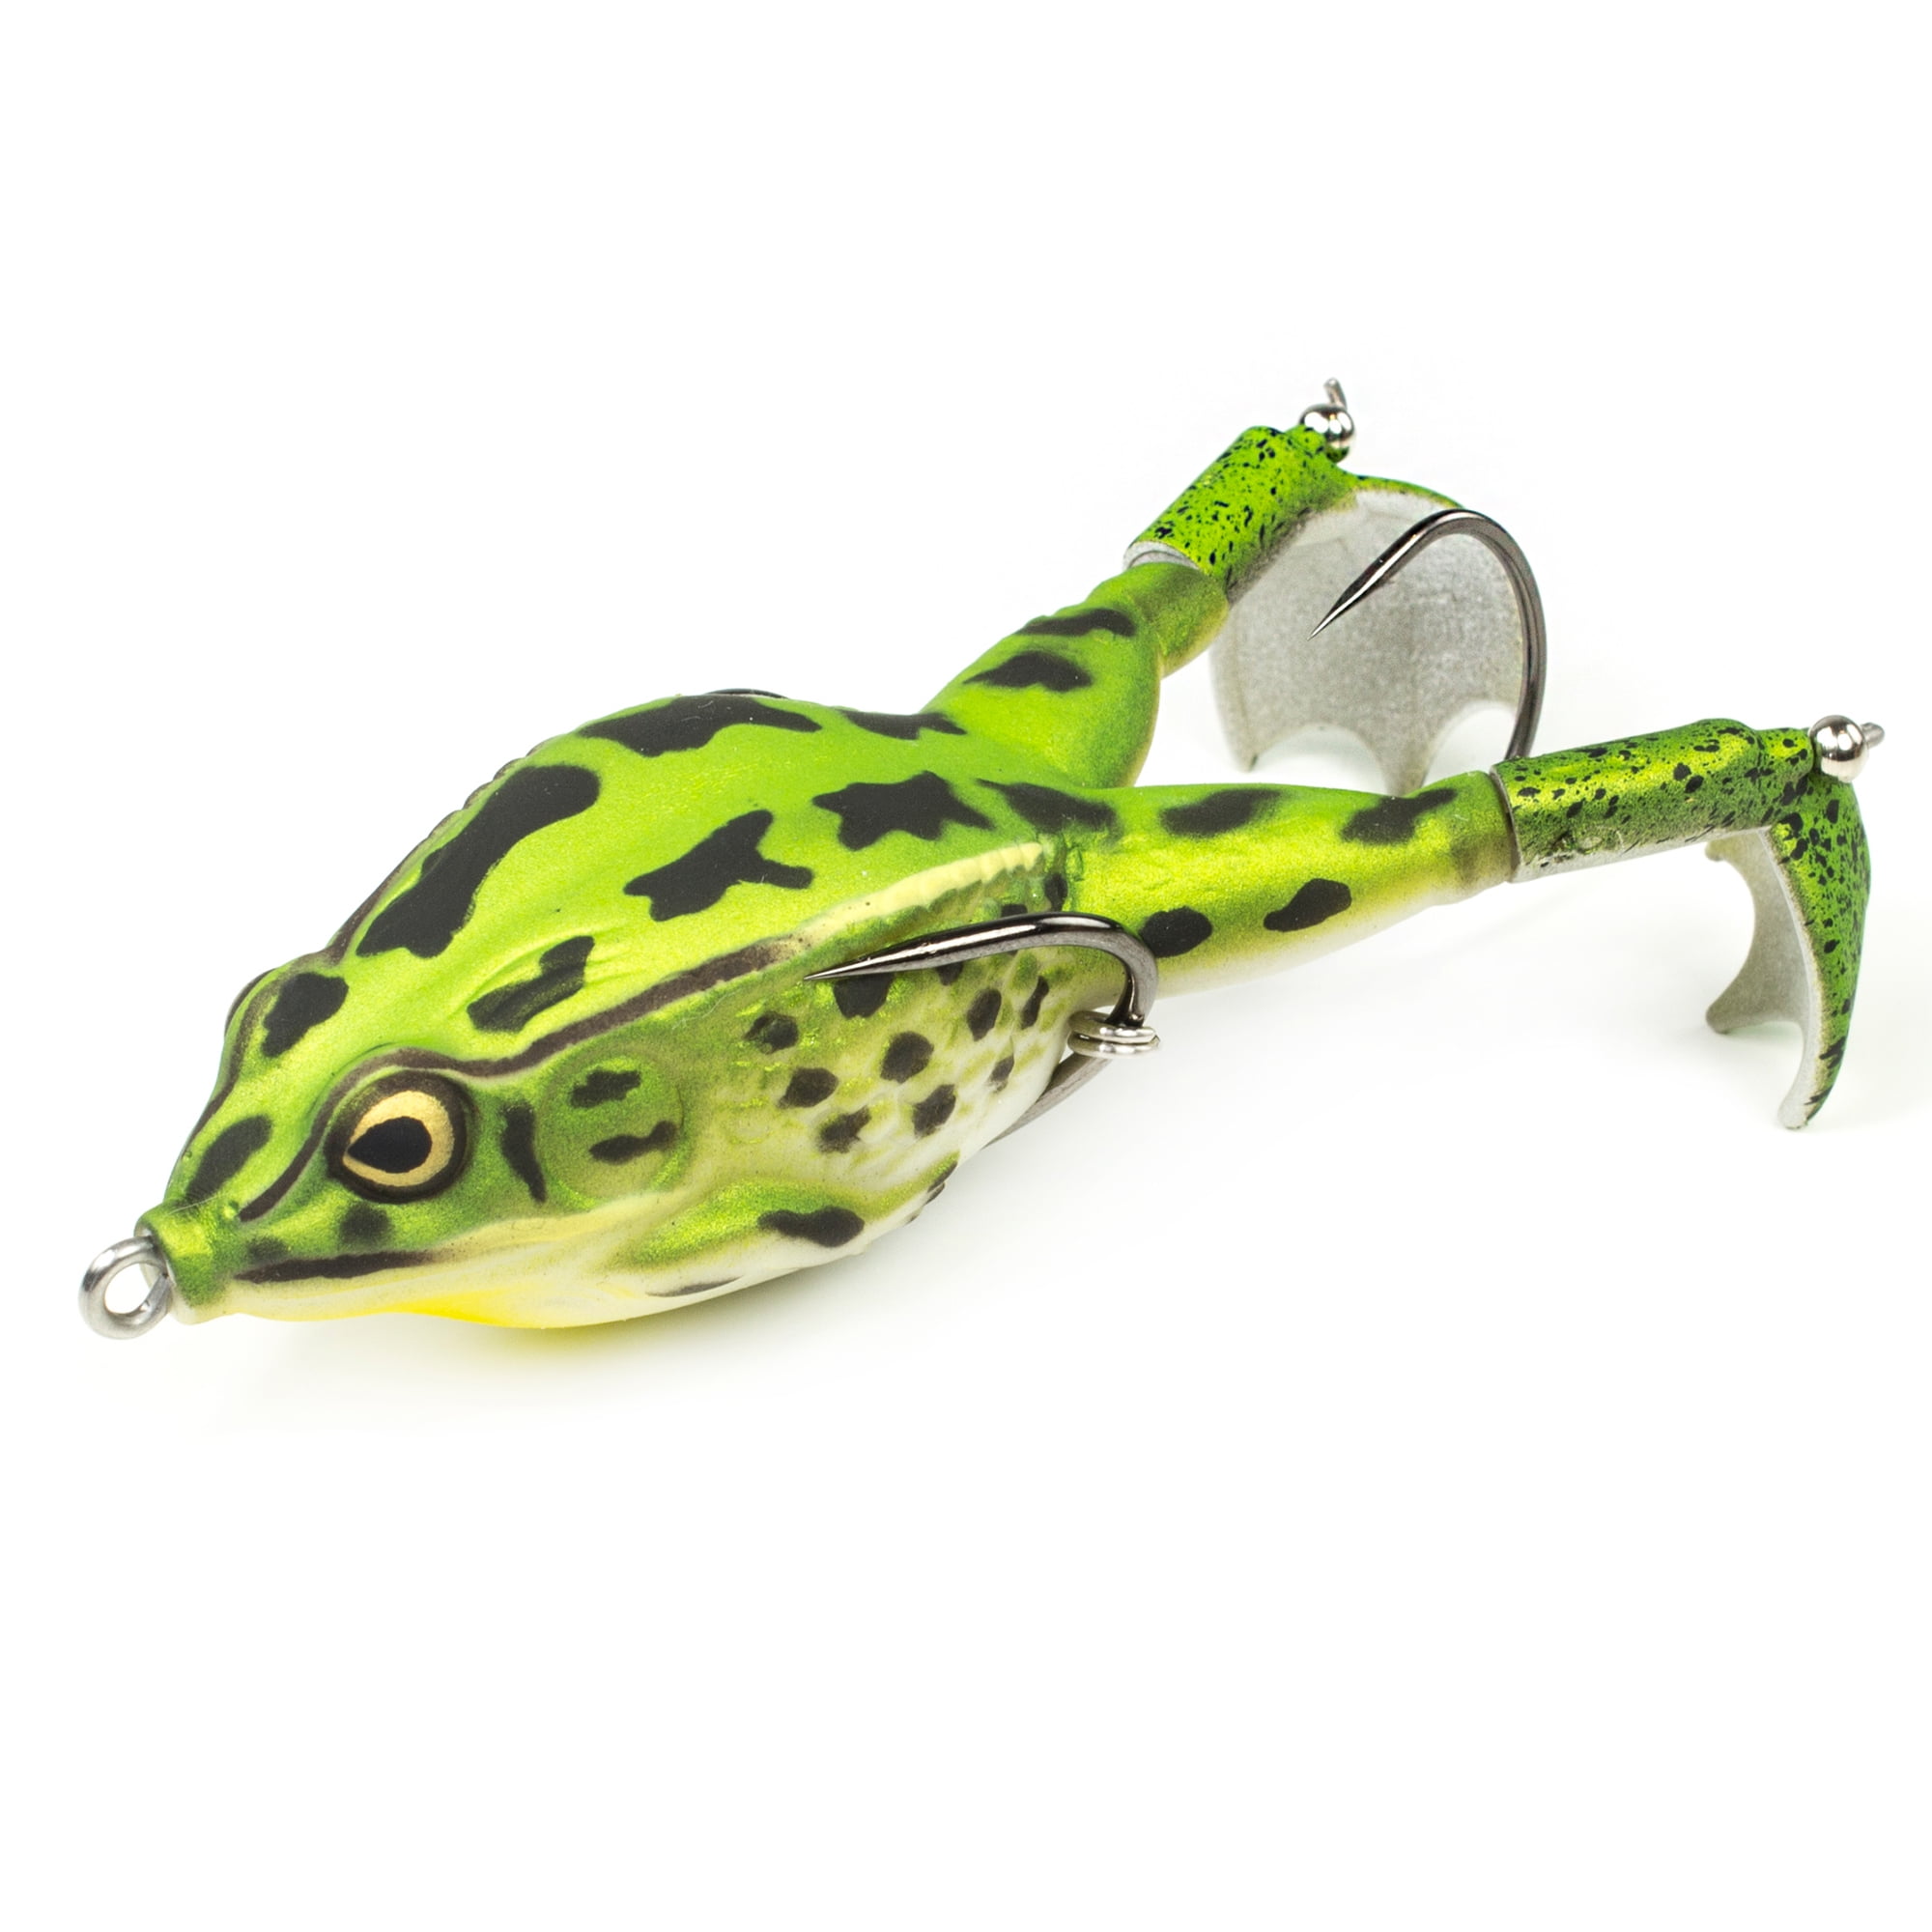 Fishing Baits Lunker Frog Freshwater Fishing Lure with Realistic Design  Weighs 0.67 oz 2.5” Length - AliExpress